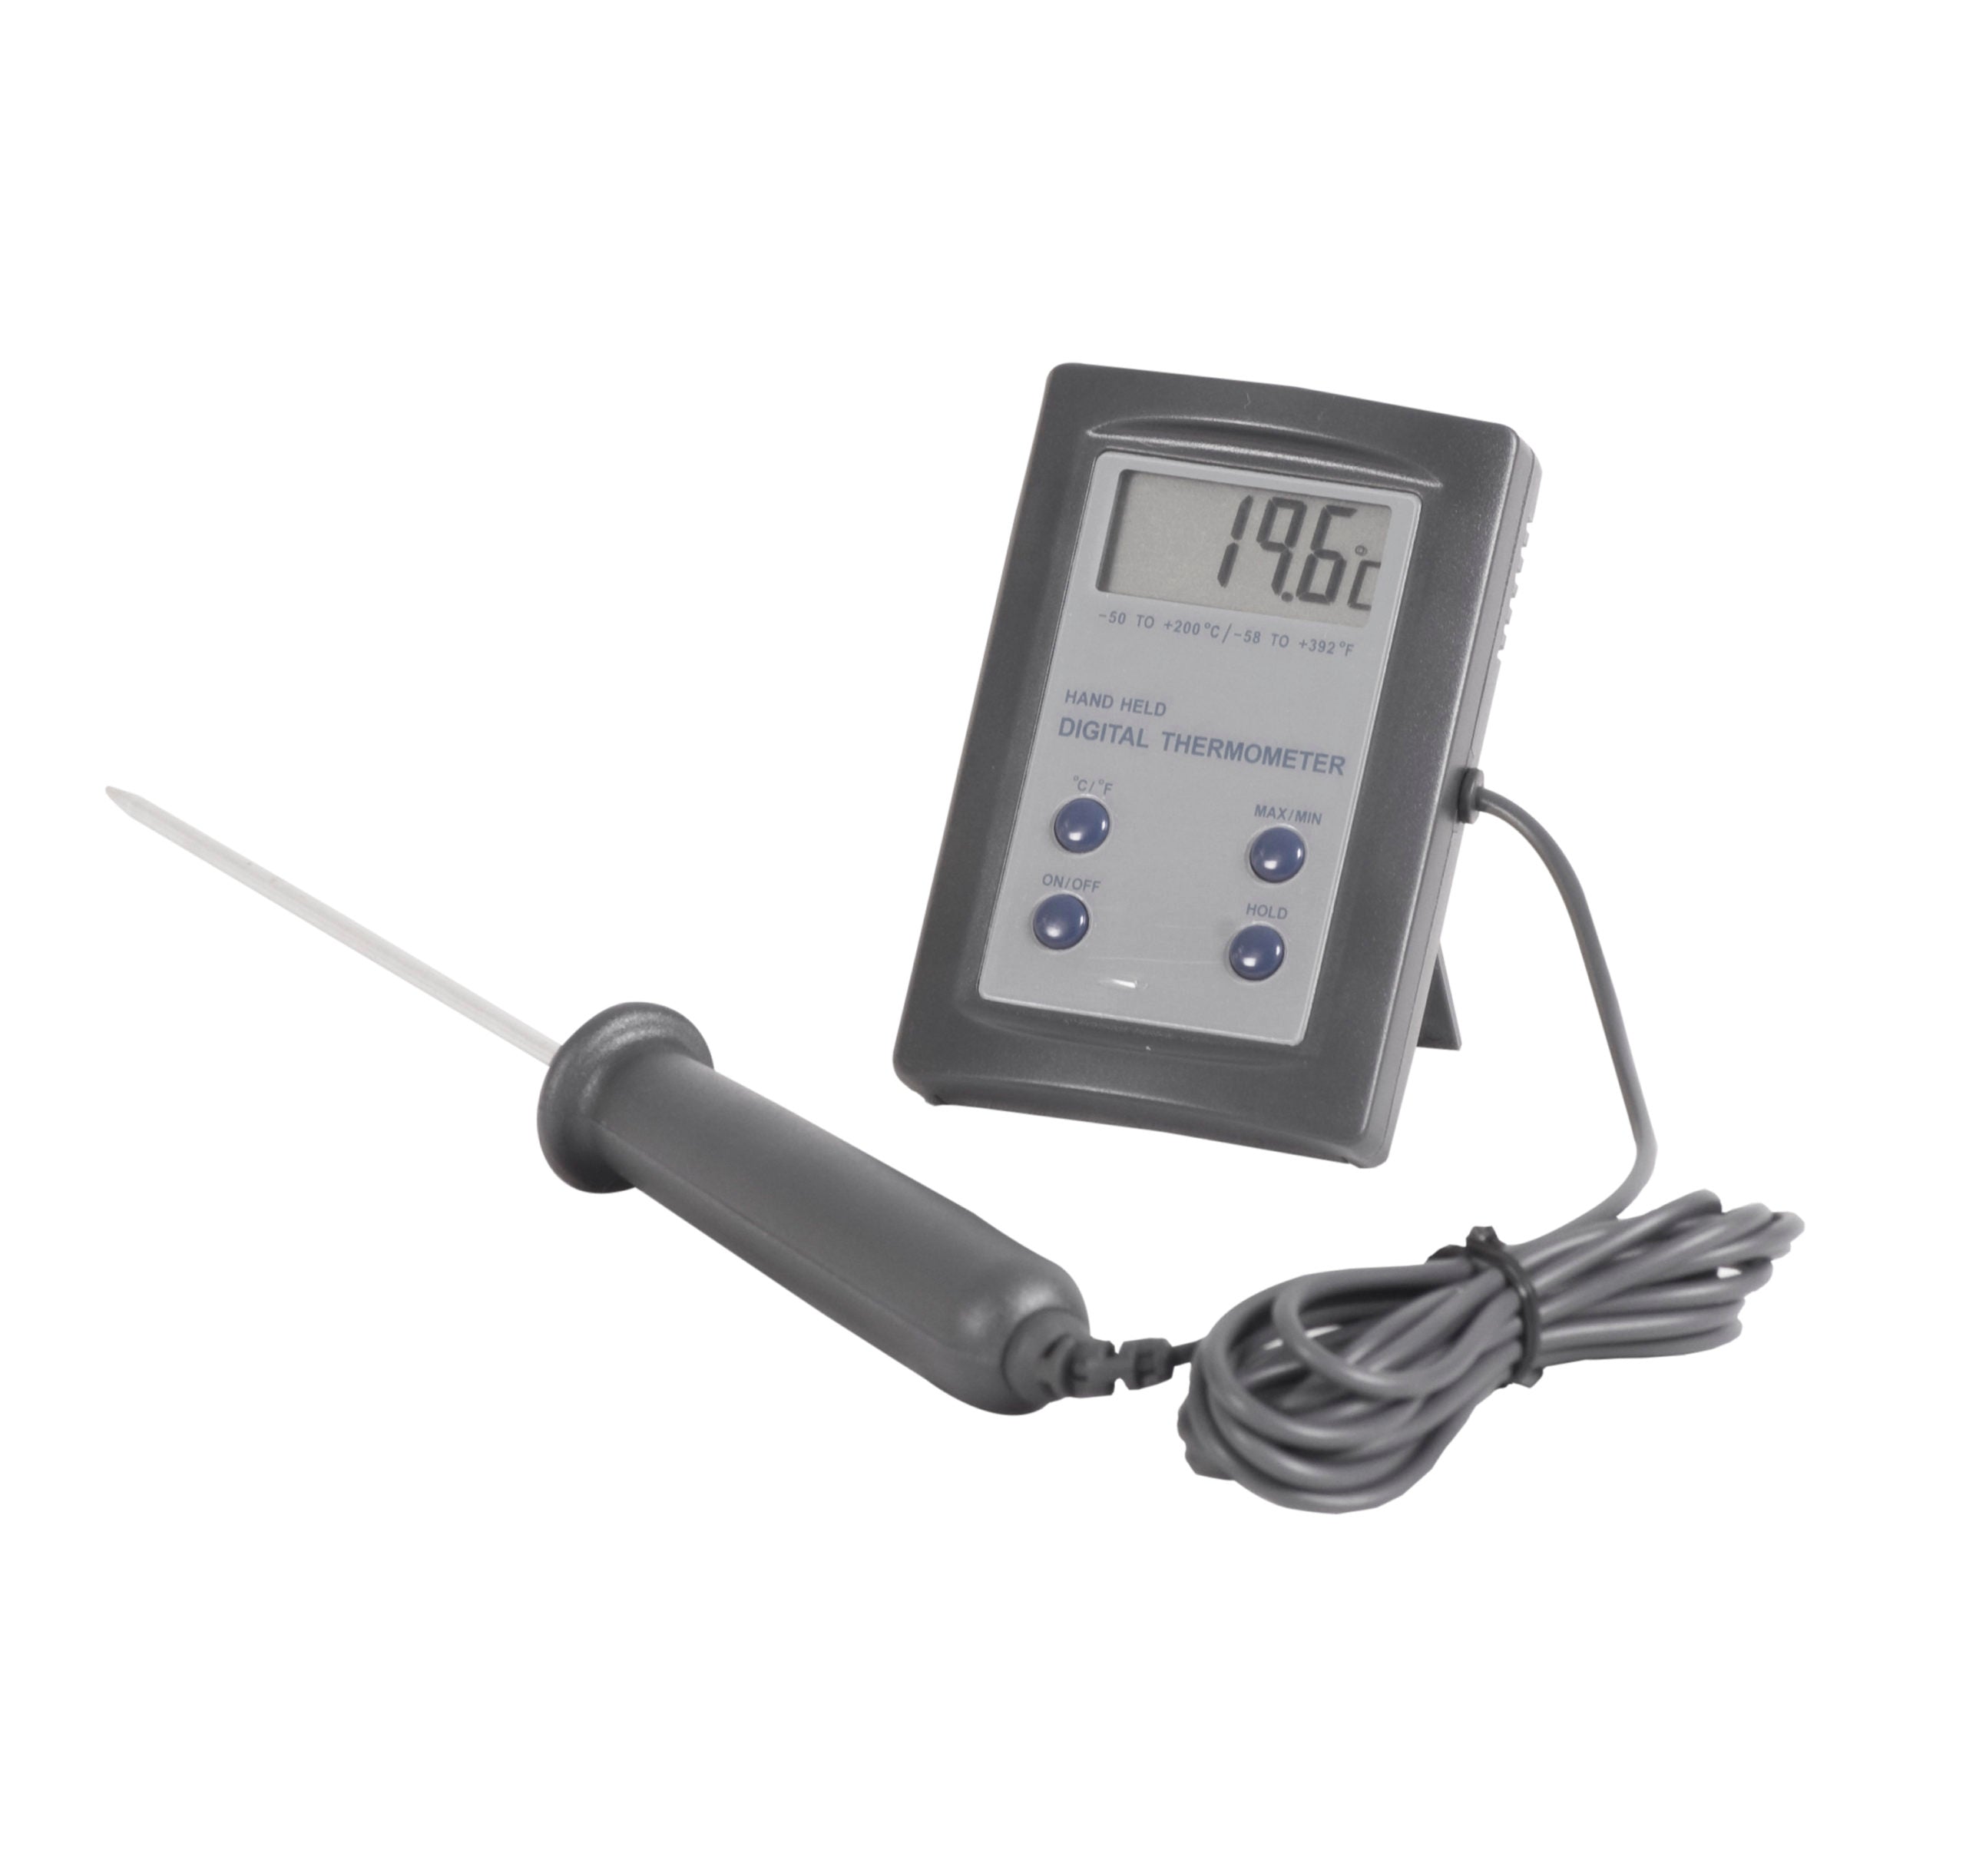 Digital Thermometer + Timer [-50°c to 200°c] Other Brands